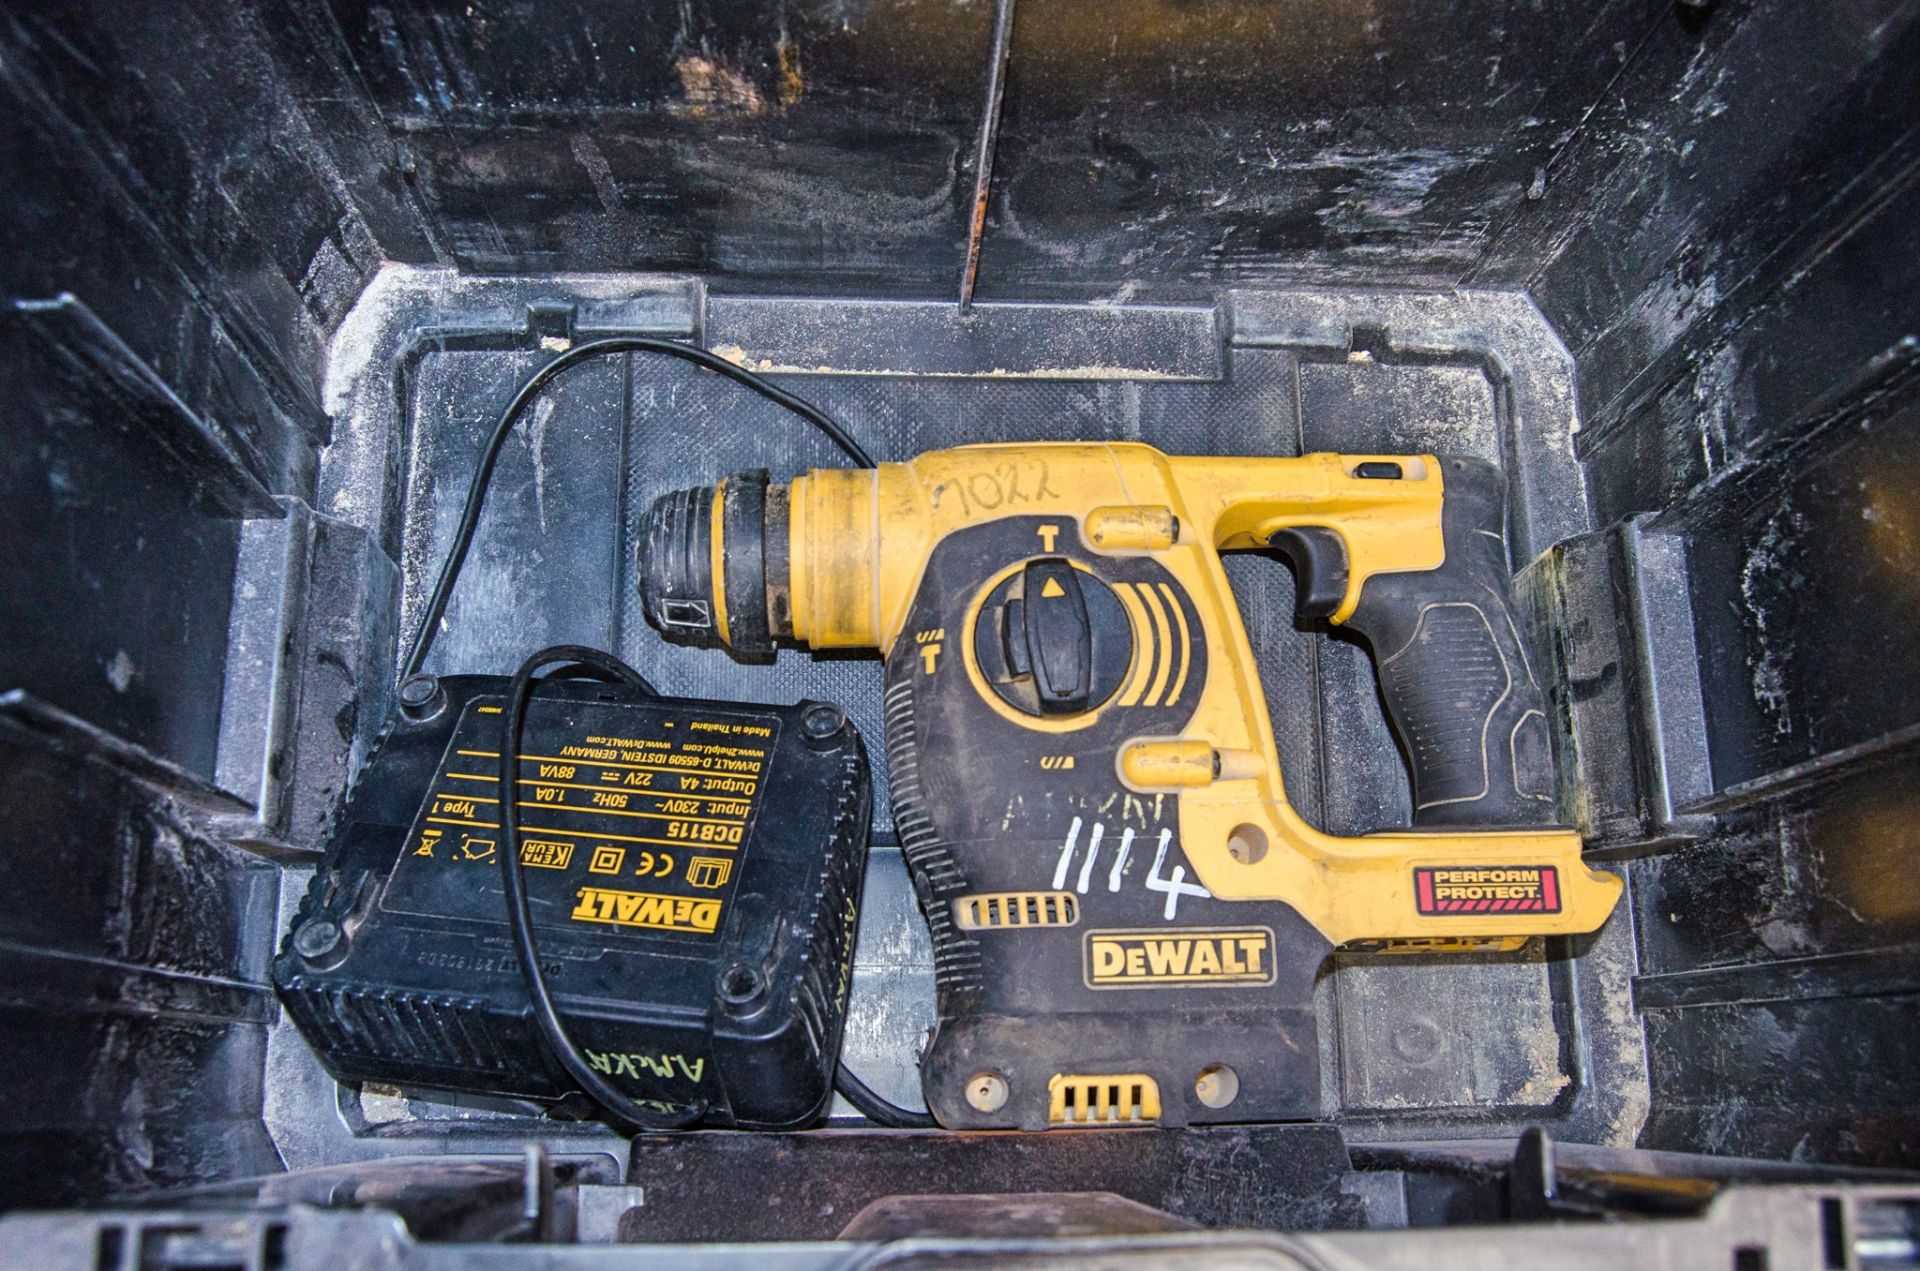 Dewalt DCH253 18v cordless SDS rotary hammer drill c/w charger and carry case ** No battery **